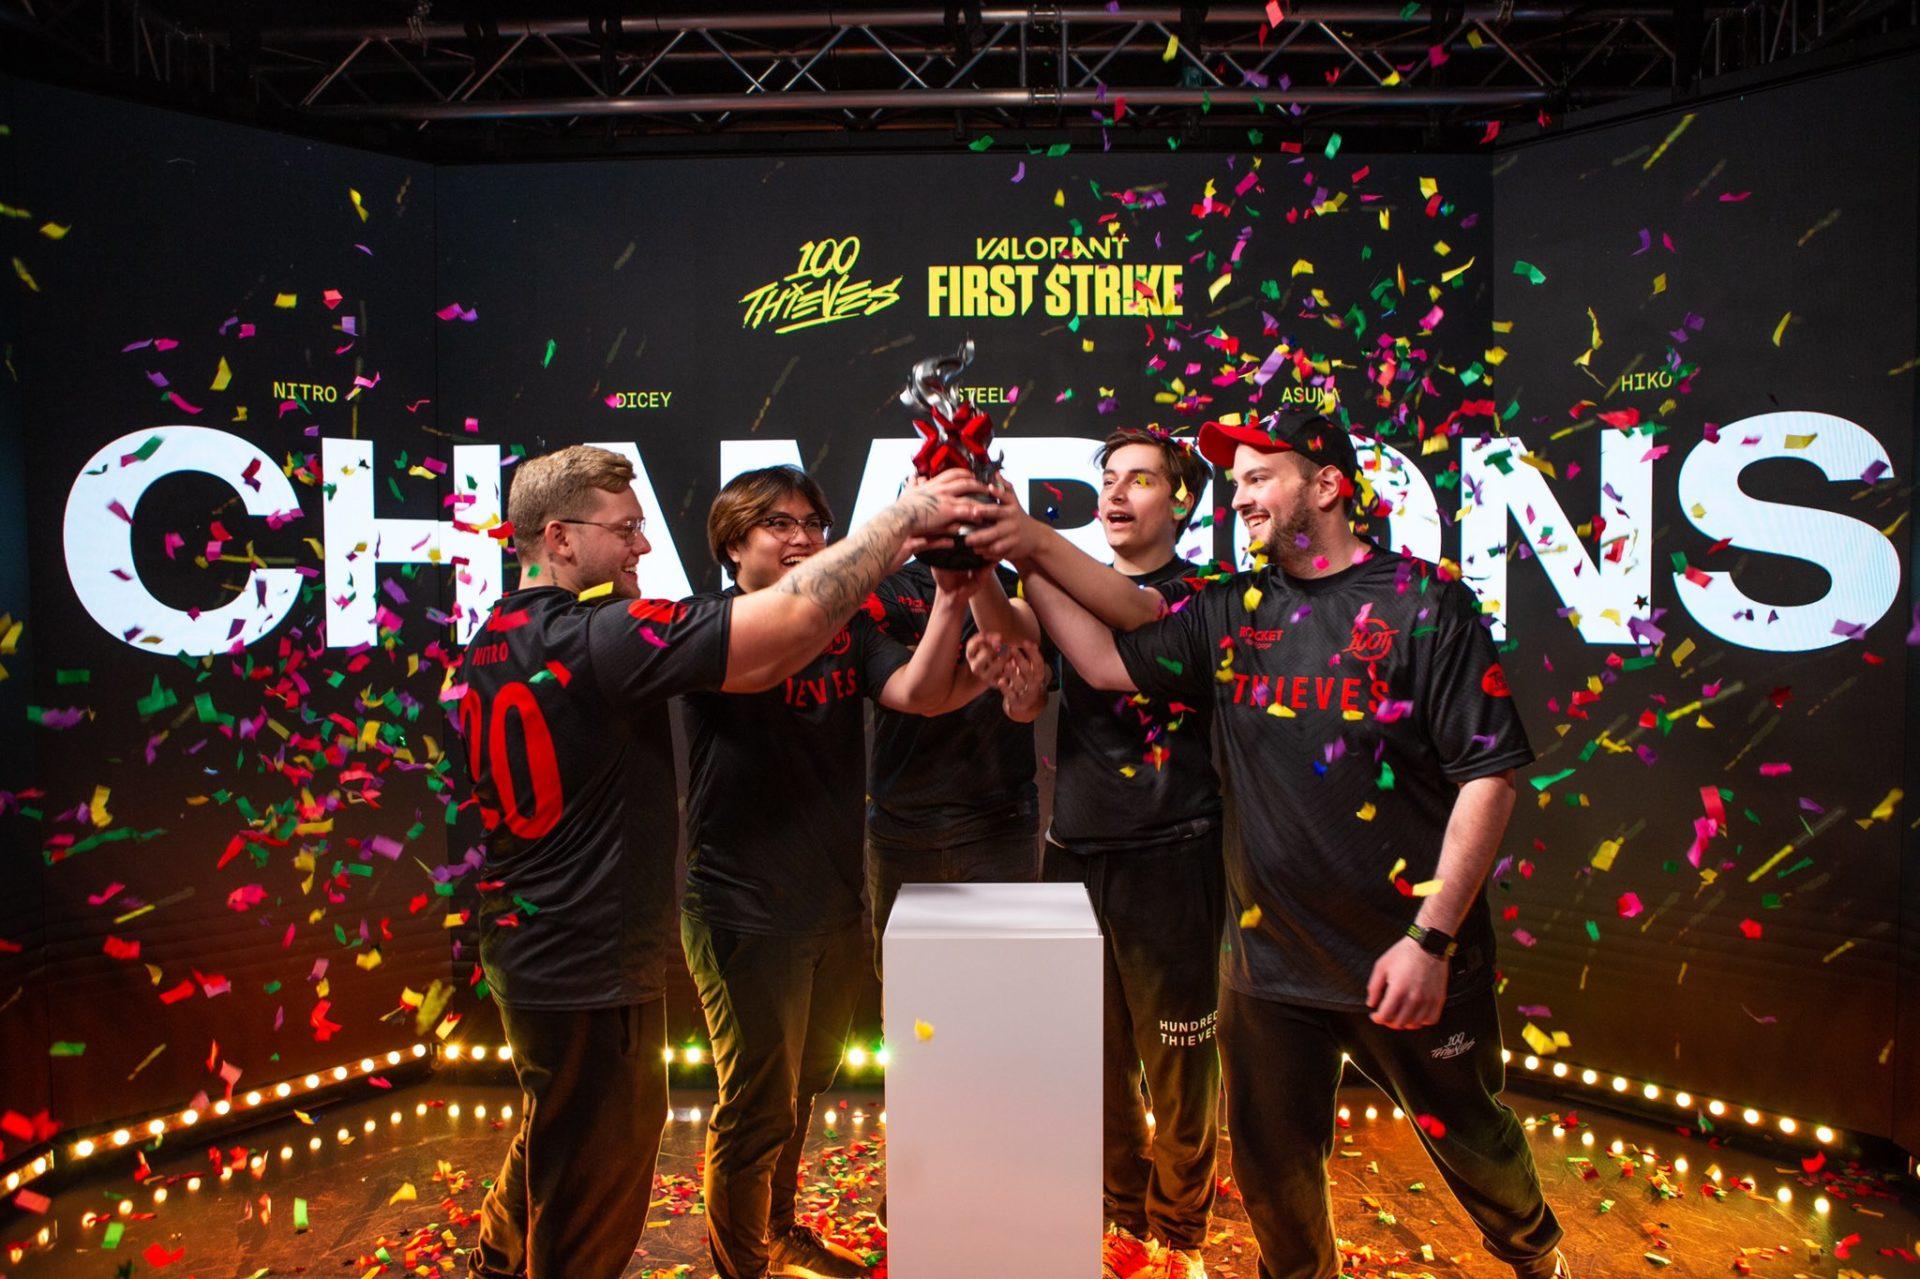 100 Thieves win Valorant First Strike NA